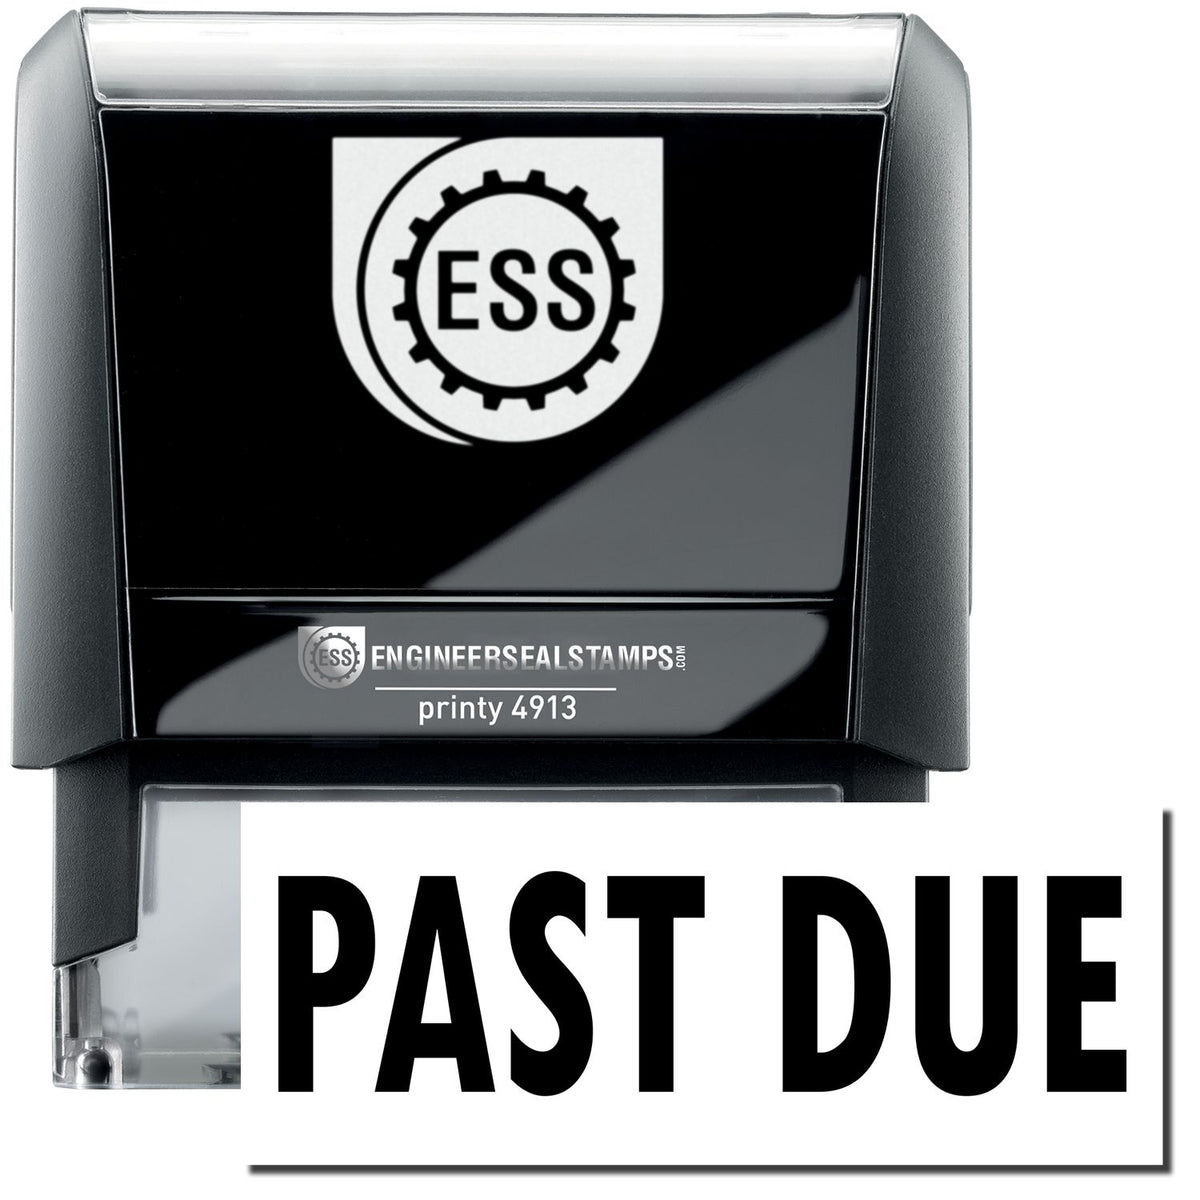 A self-inking stamp with a stamped image showing how the text &quot;PAST DUE&quot; in a large bold font is displayed by it.